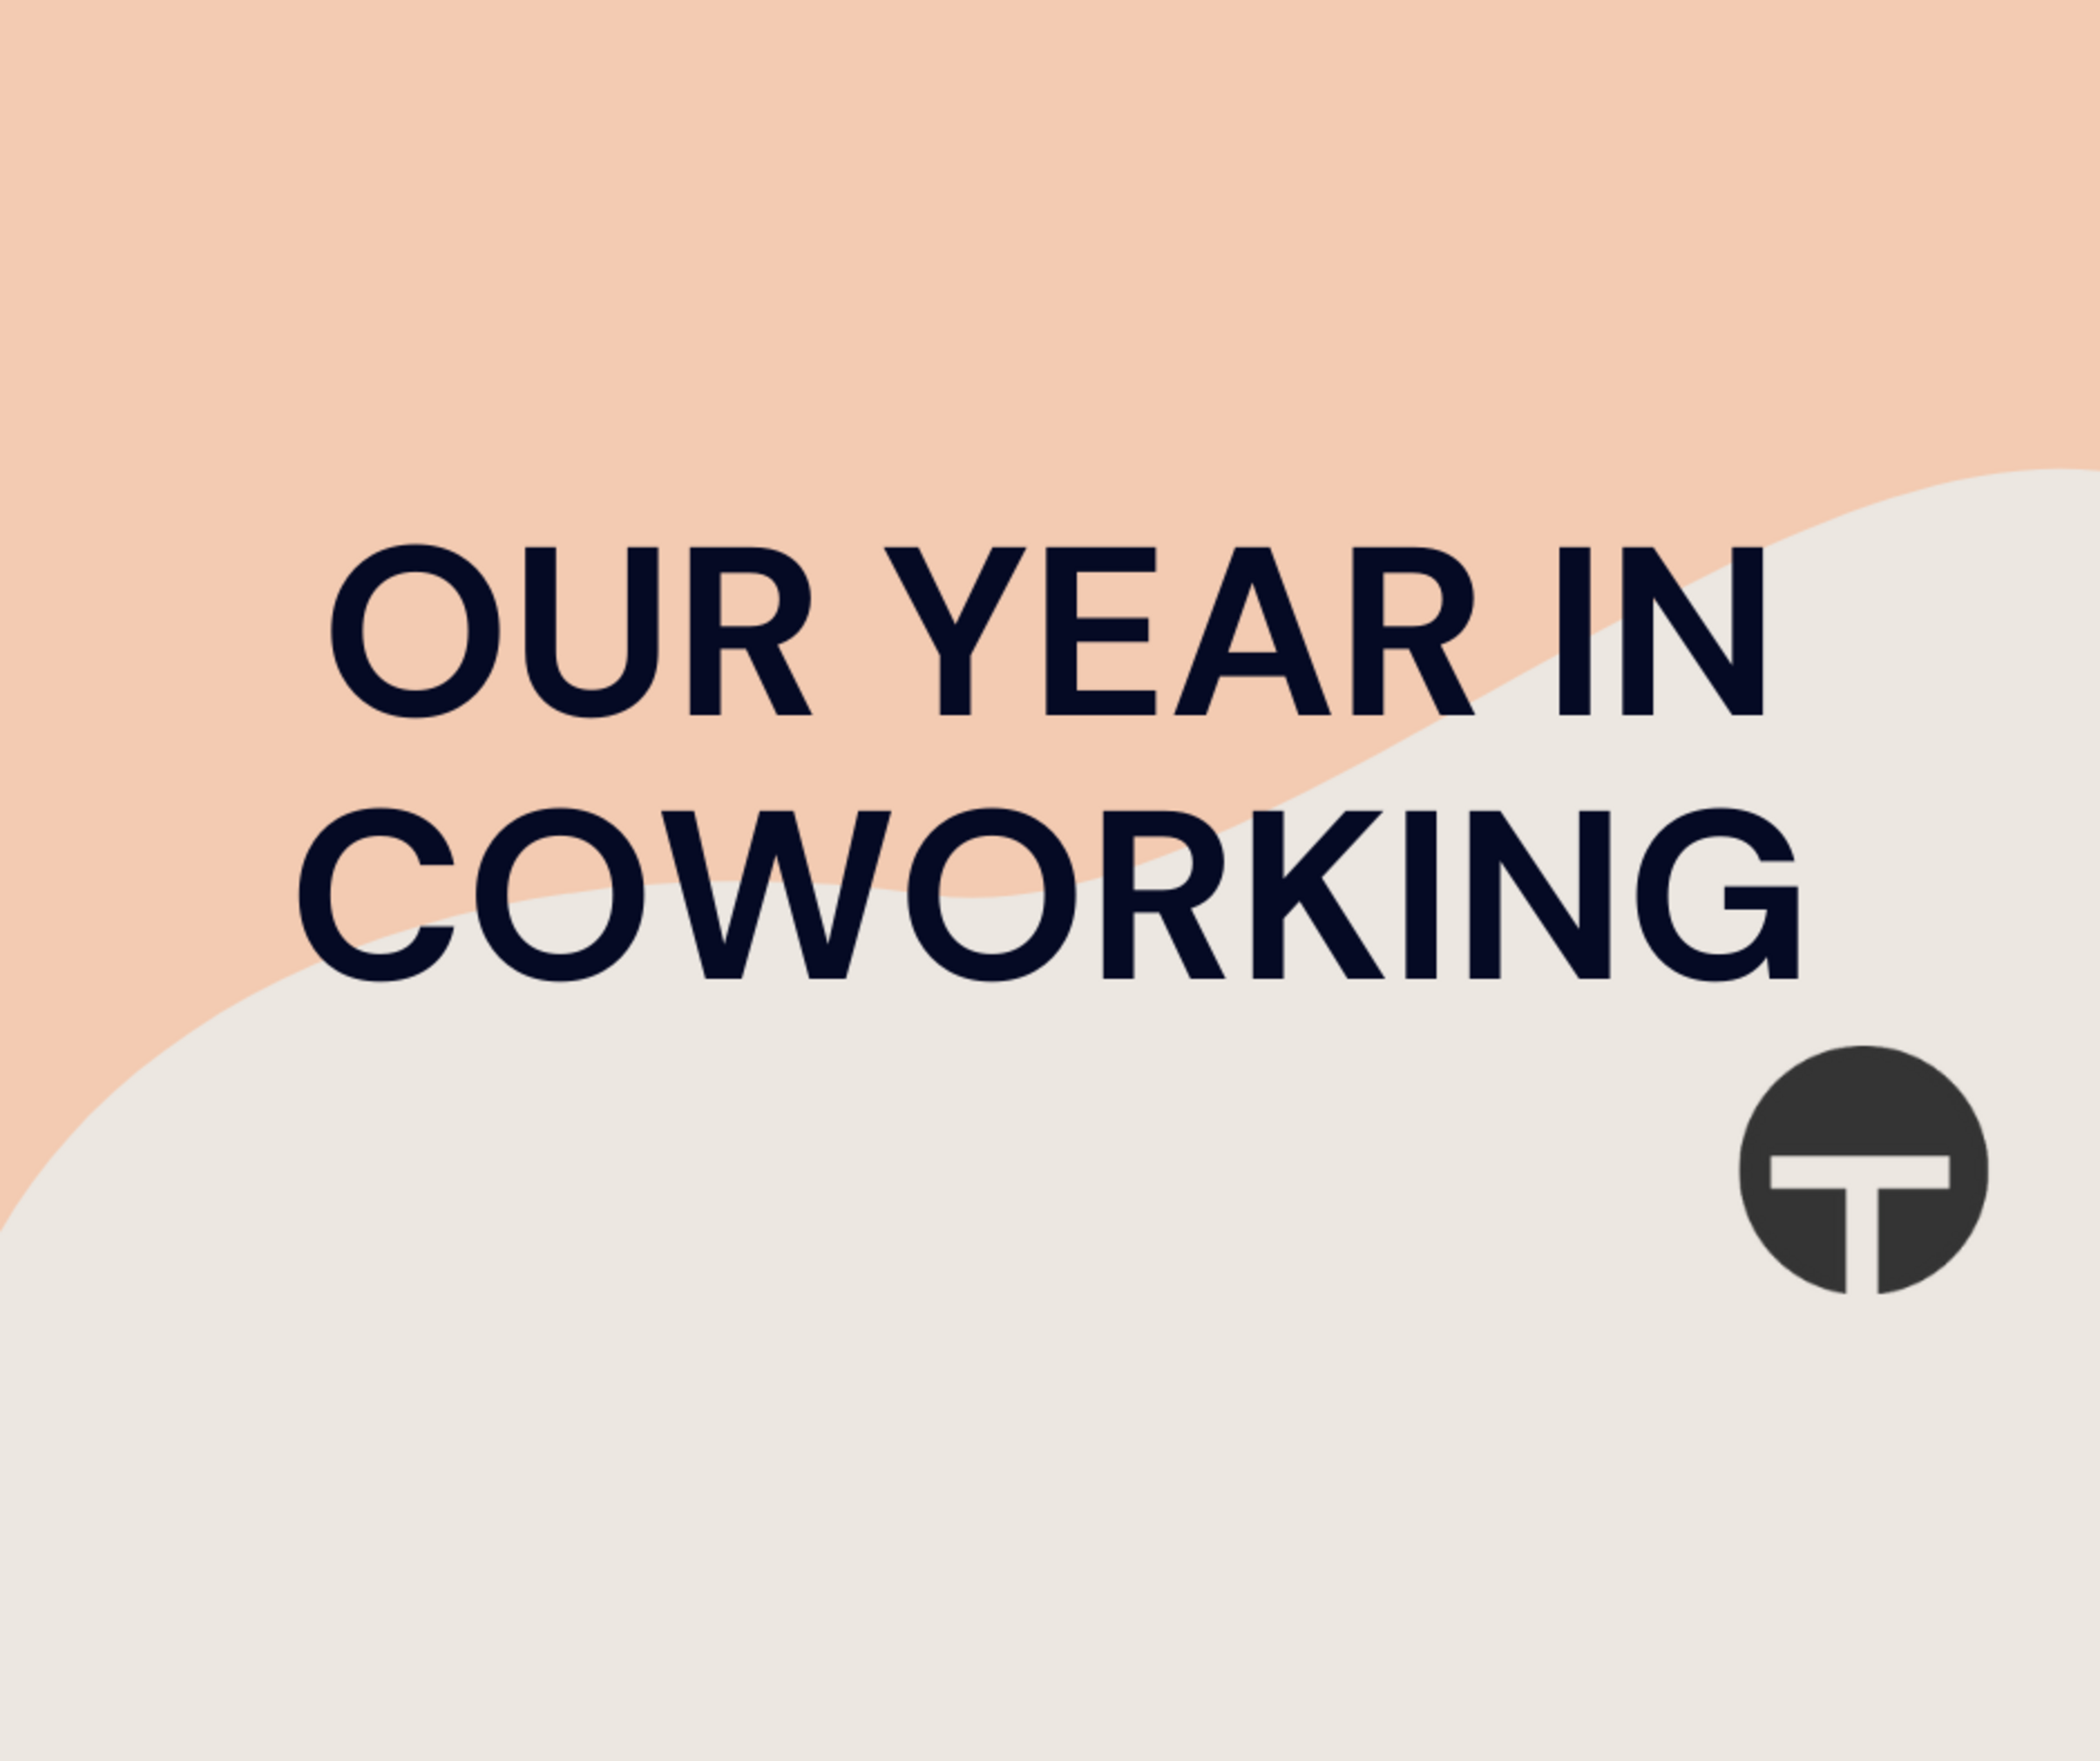 Our Year In Coworking